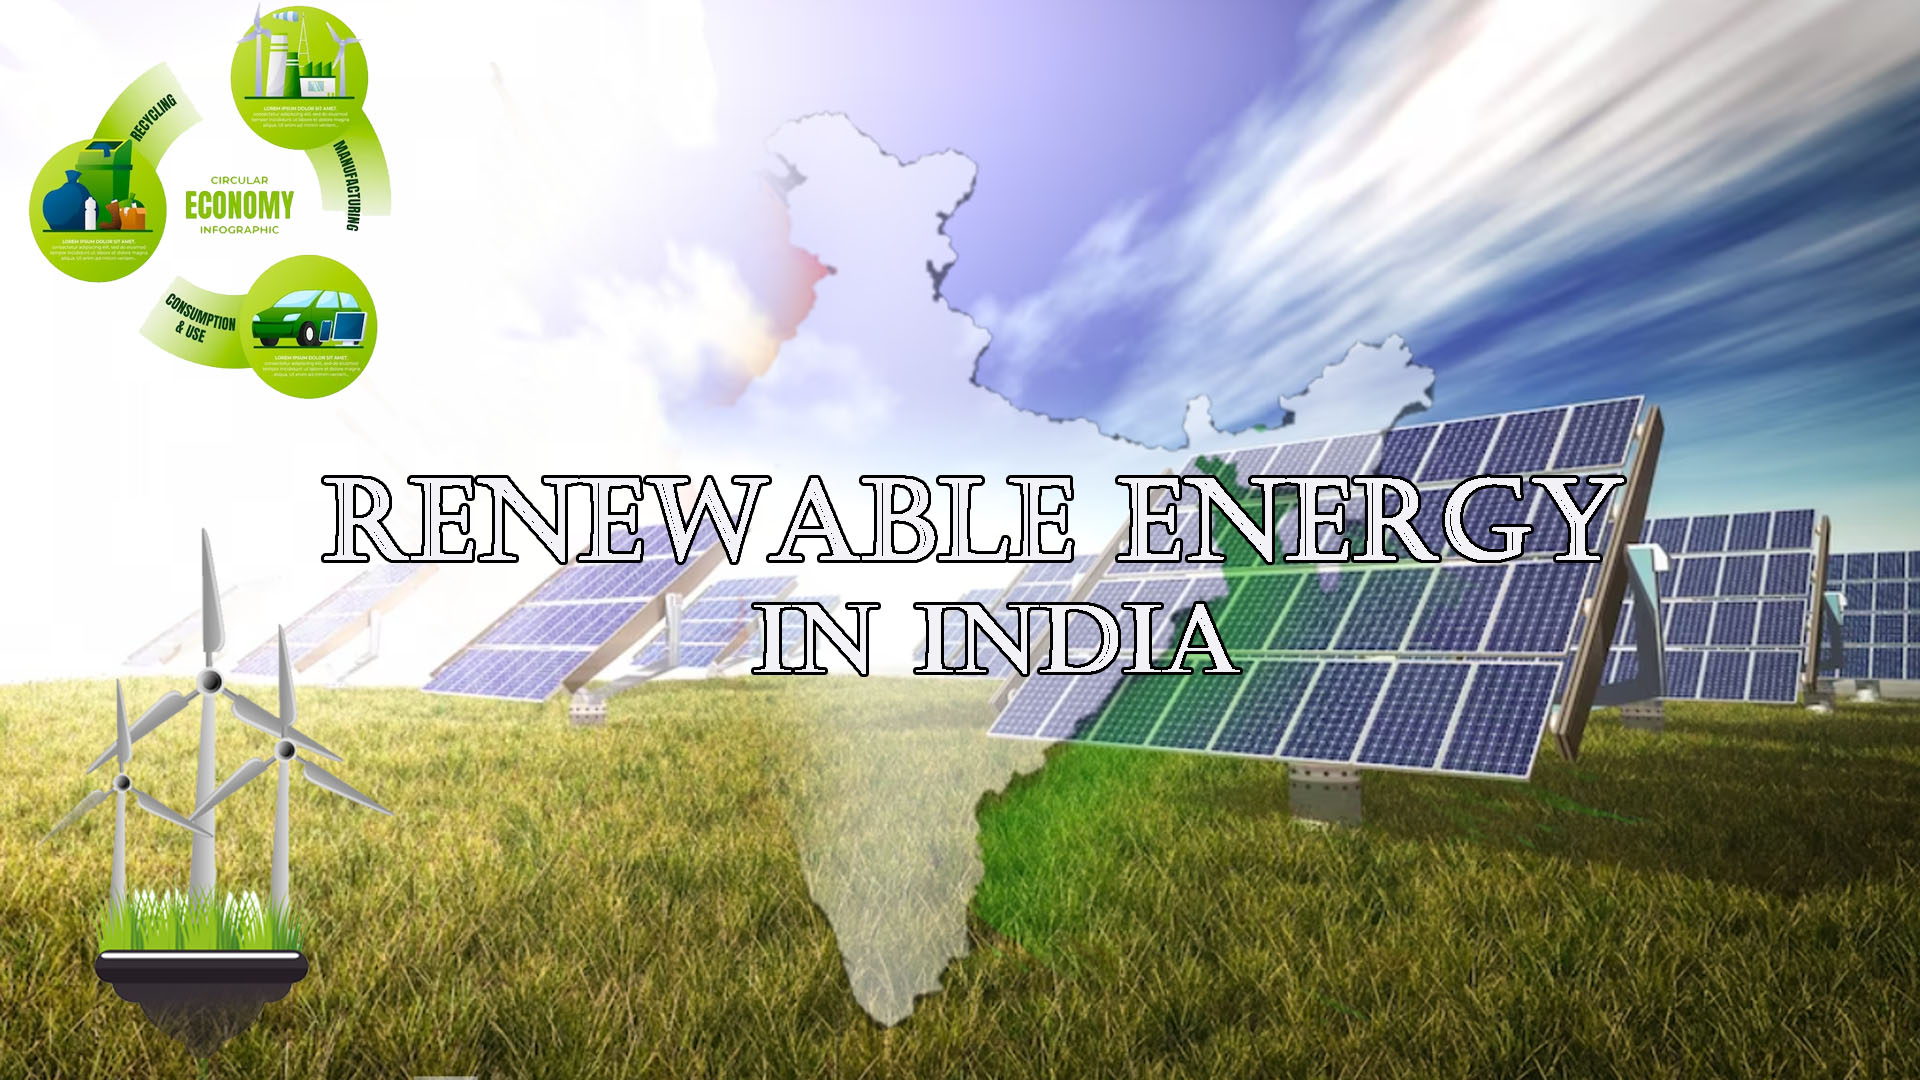 The Big Push for Renewable Energy in India